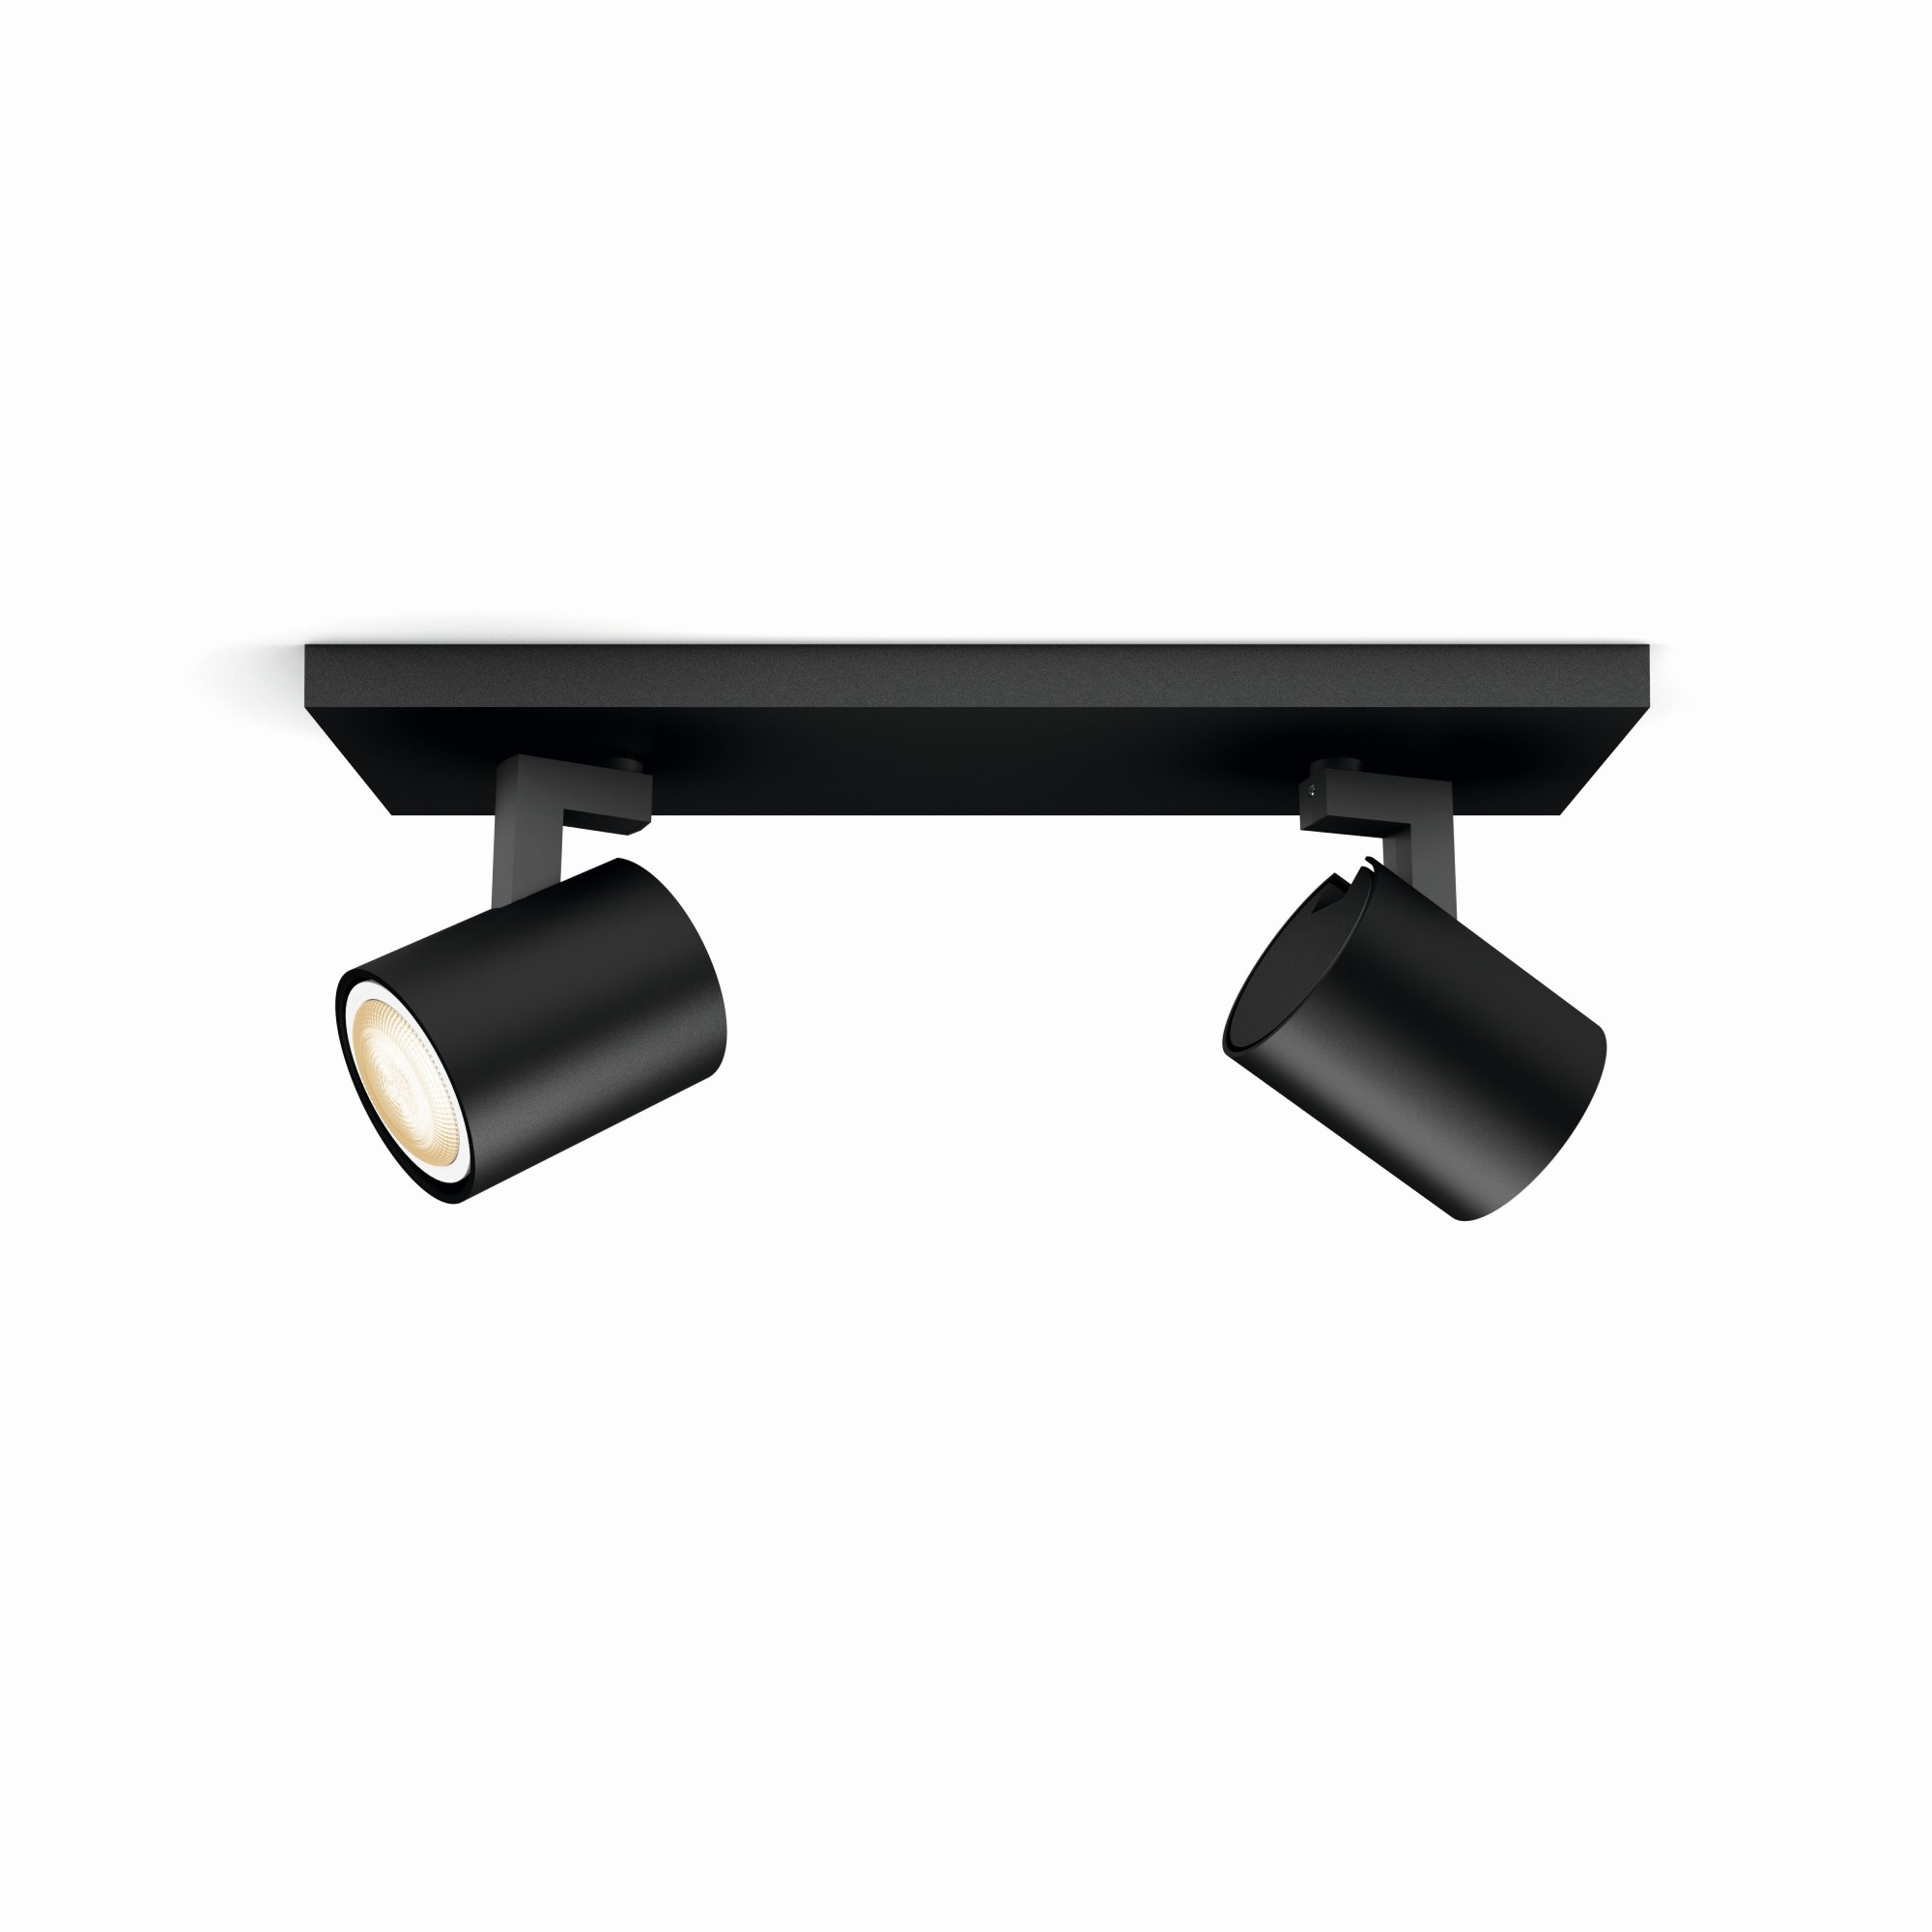 Spot Philips Hue alb Ambiance Runner LED double-flamed negru 2x 350lm incl. Buton Dimmer